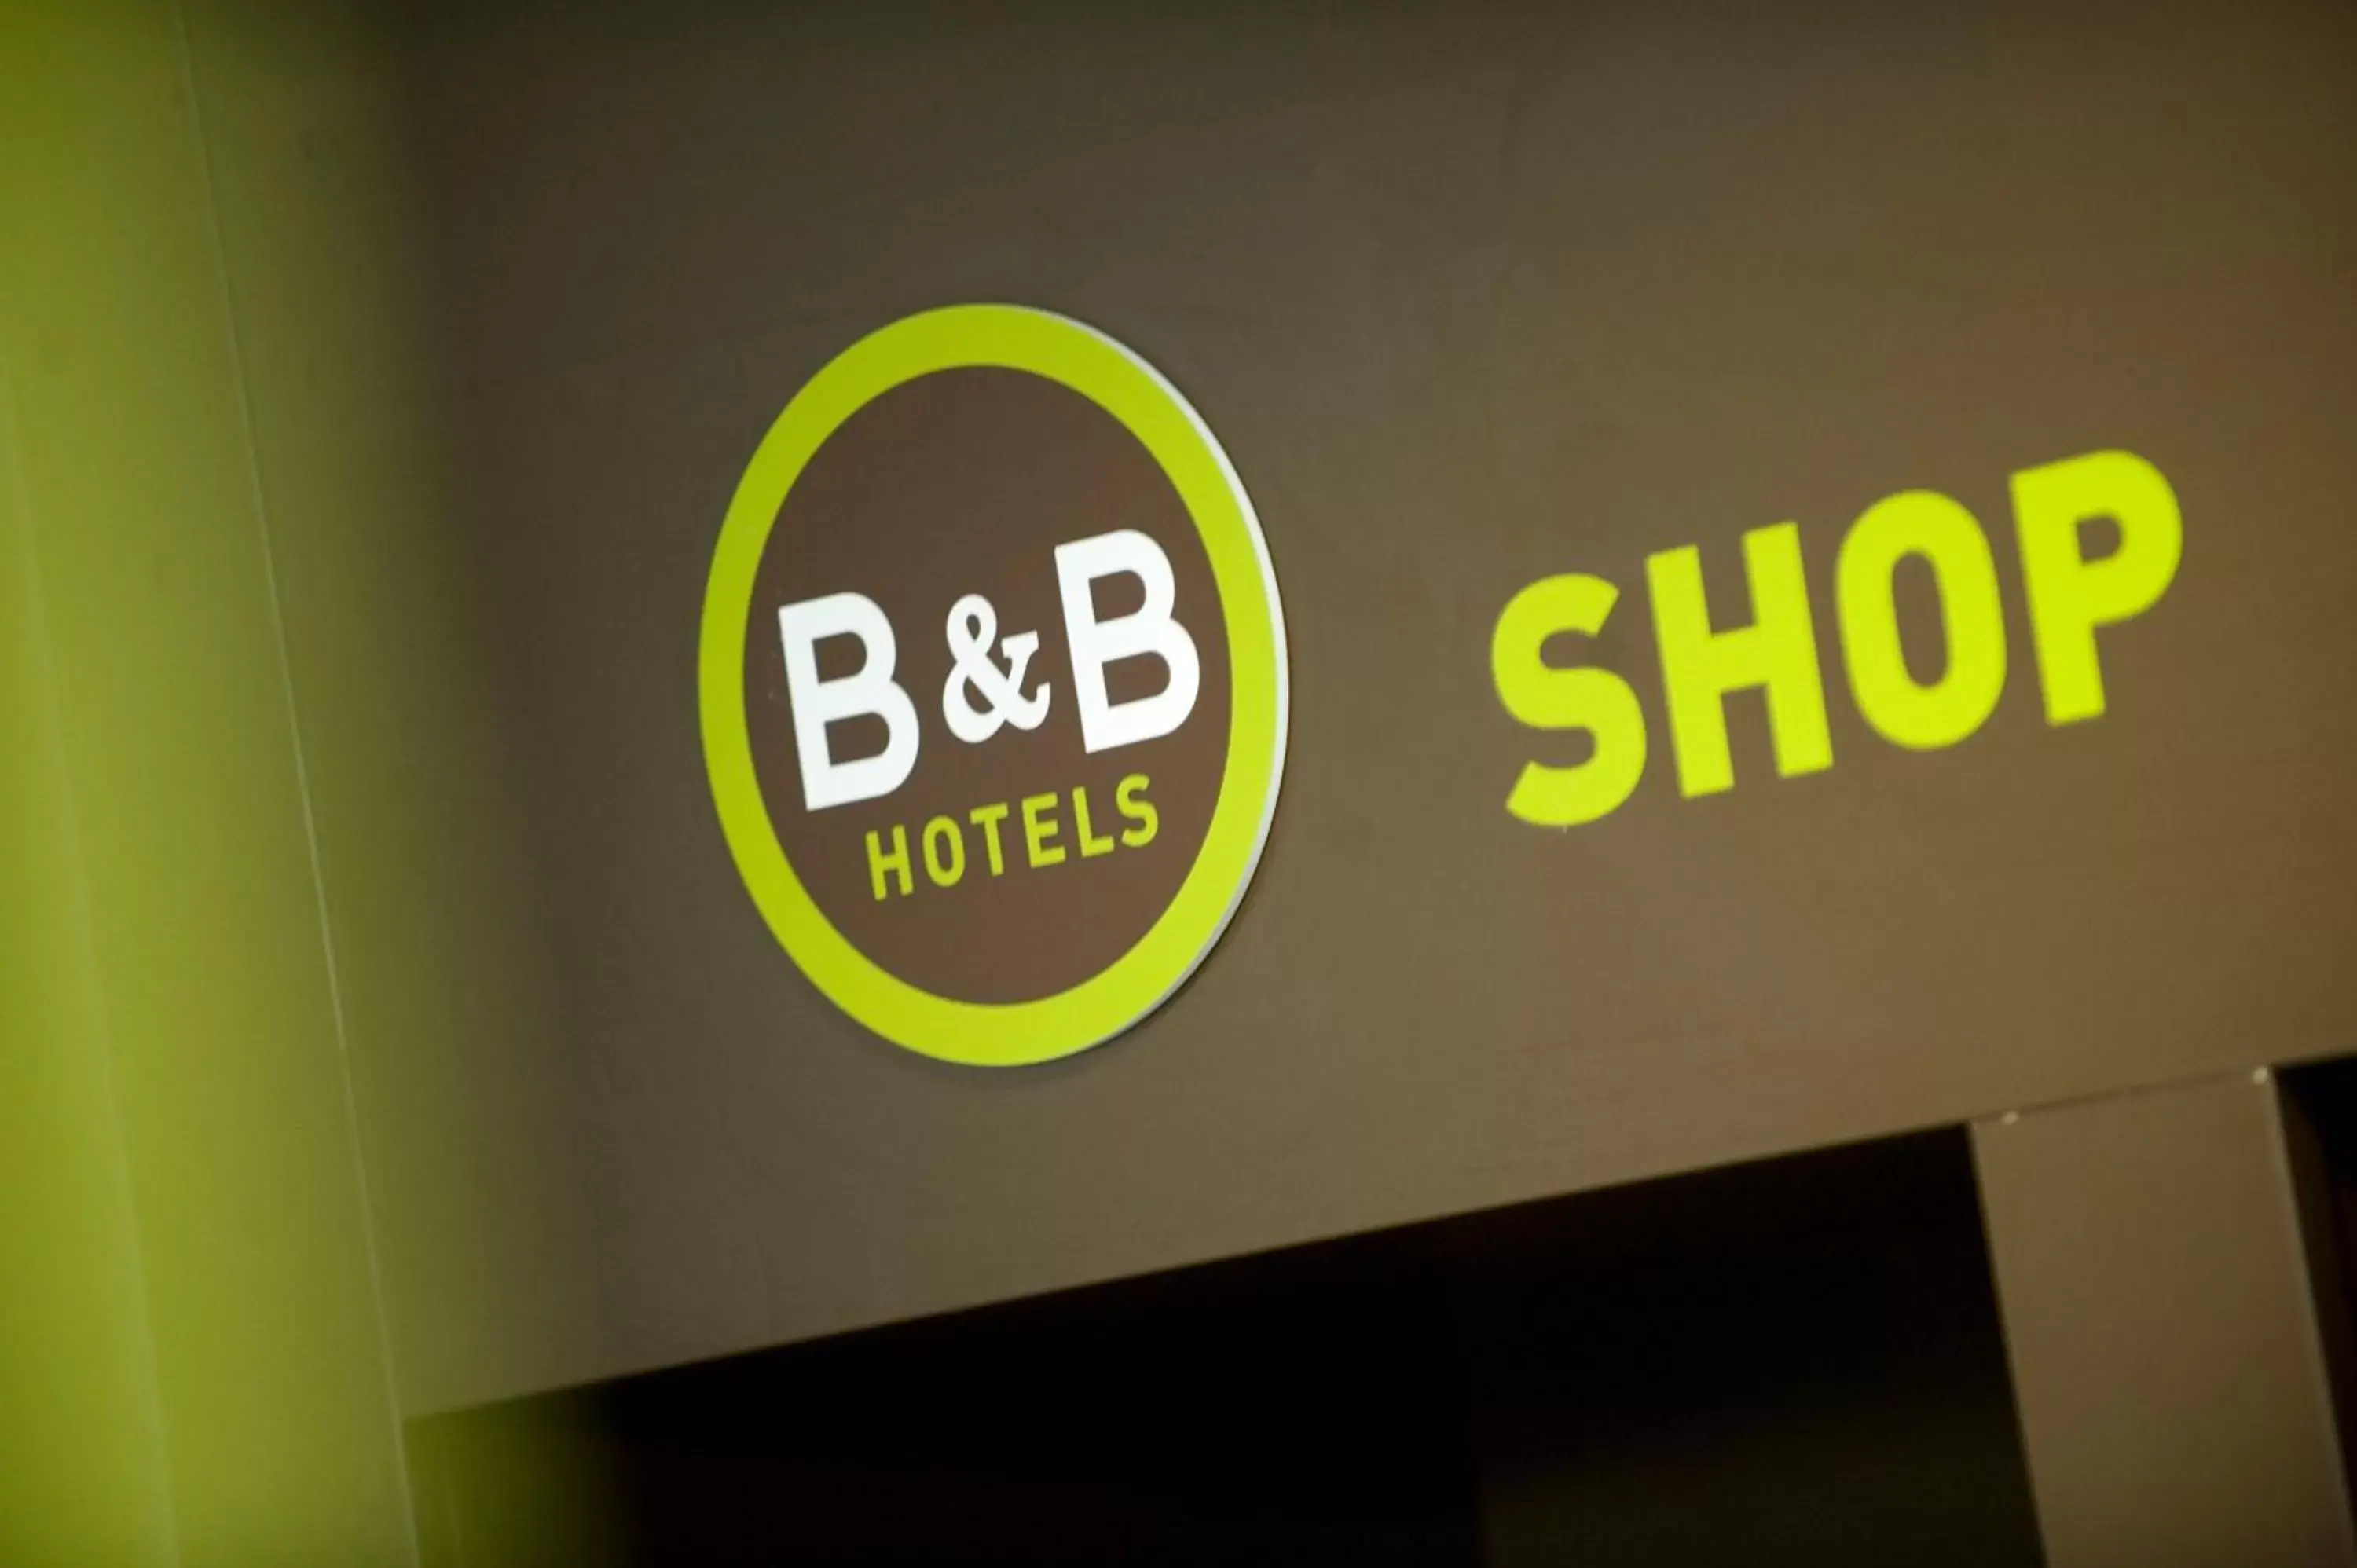 Food and drinks, Logo/Certificate/Sign/Award in B&B HOTEL Arras